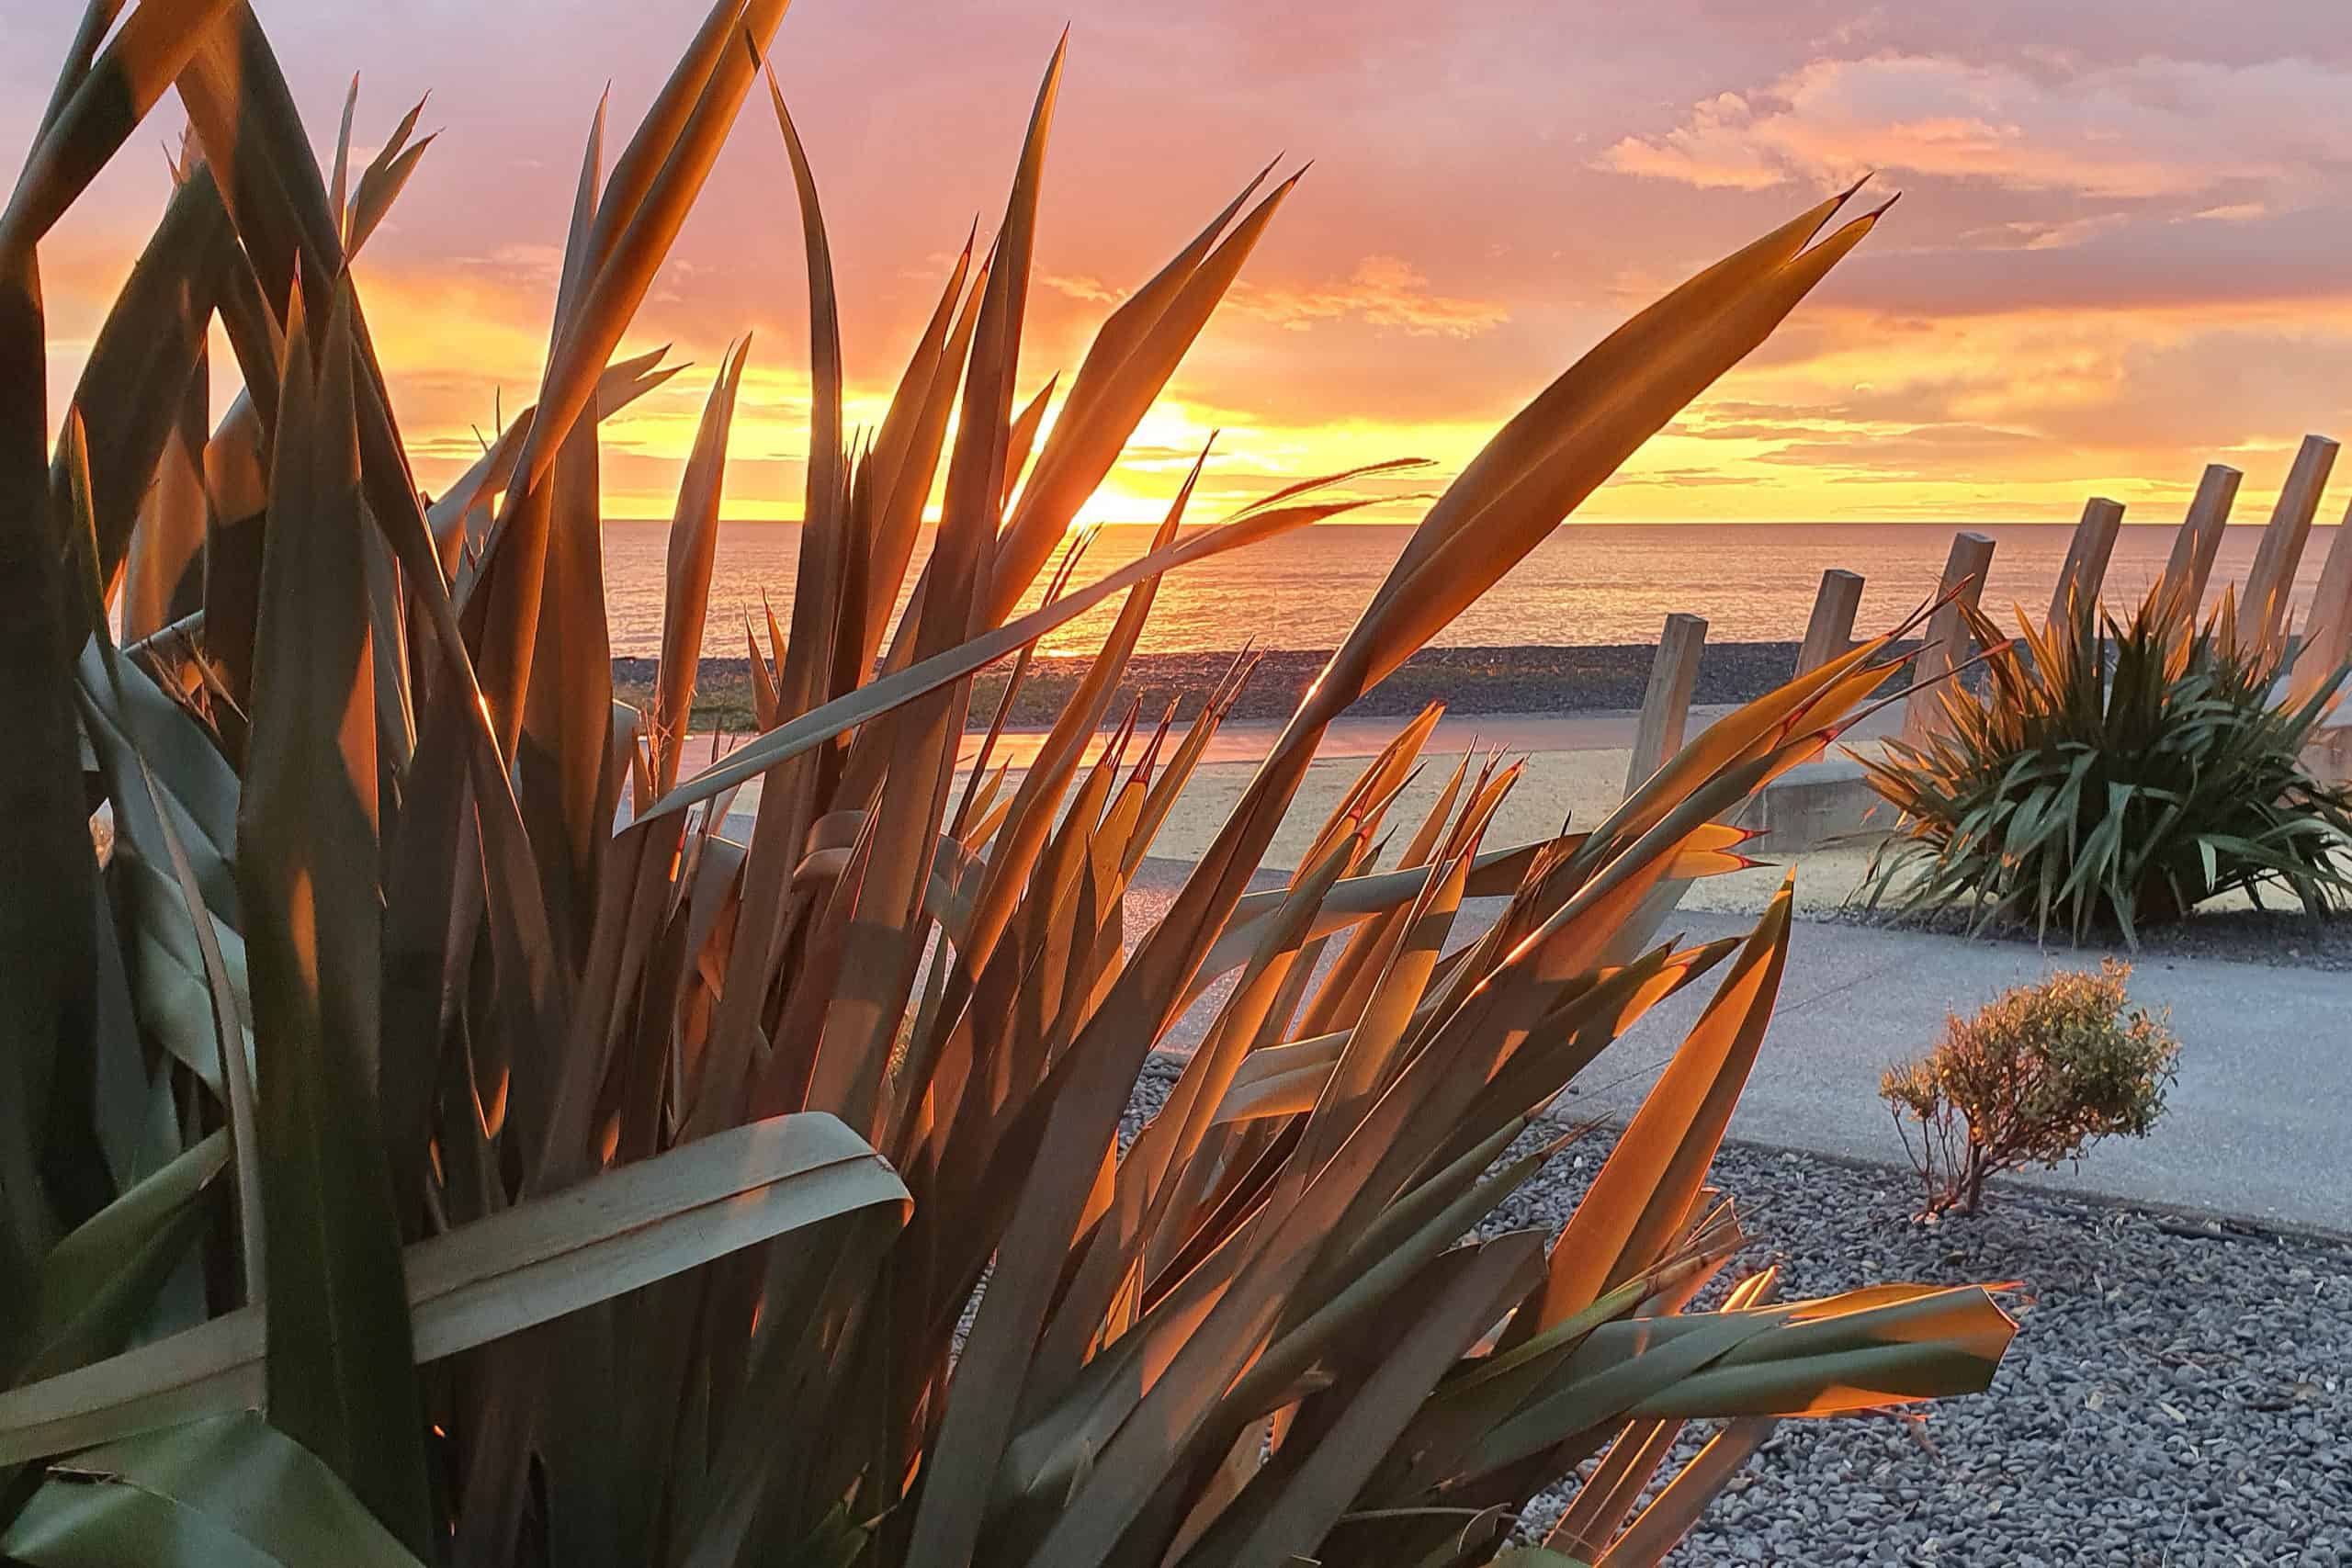 Best things to do in Napier New Zealand - Paul and Sandra - Pacific Ocean sunrise and Whalebone Sculpture